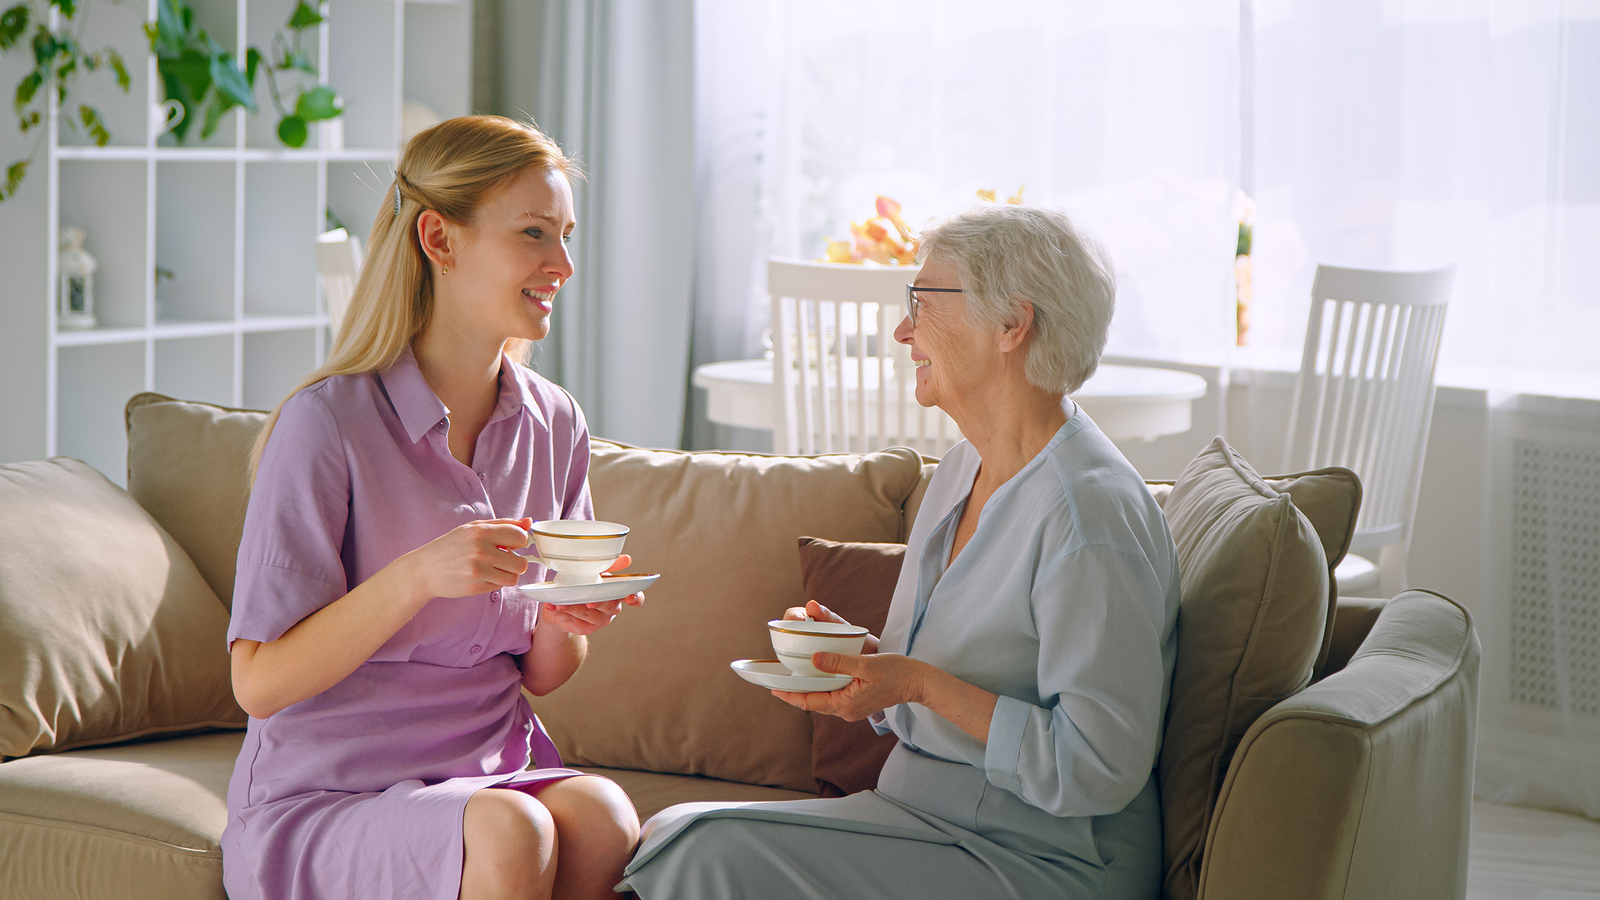 Companion Care or Personal Care – What is the Difference?